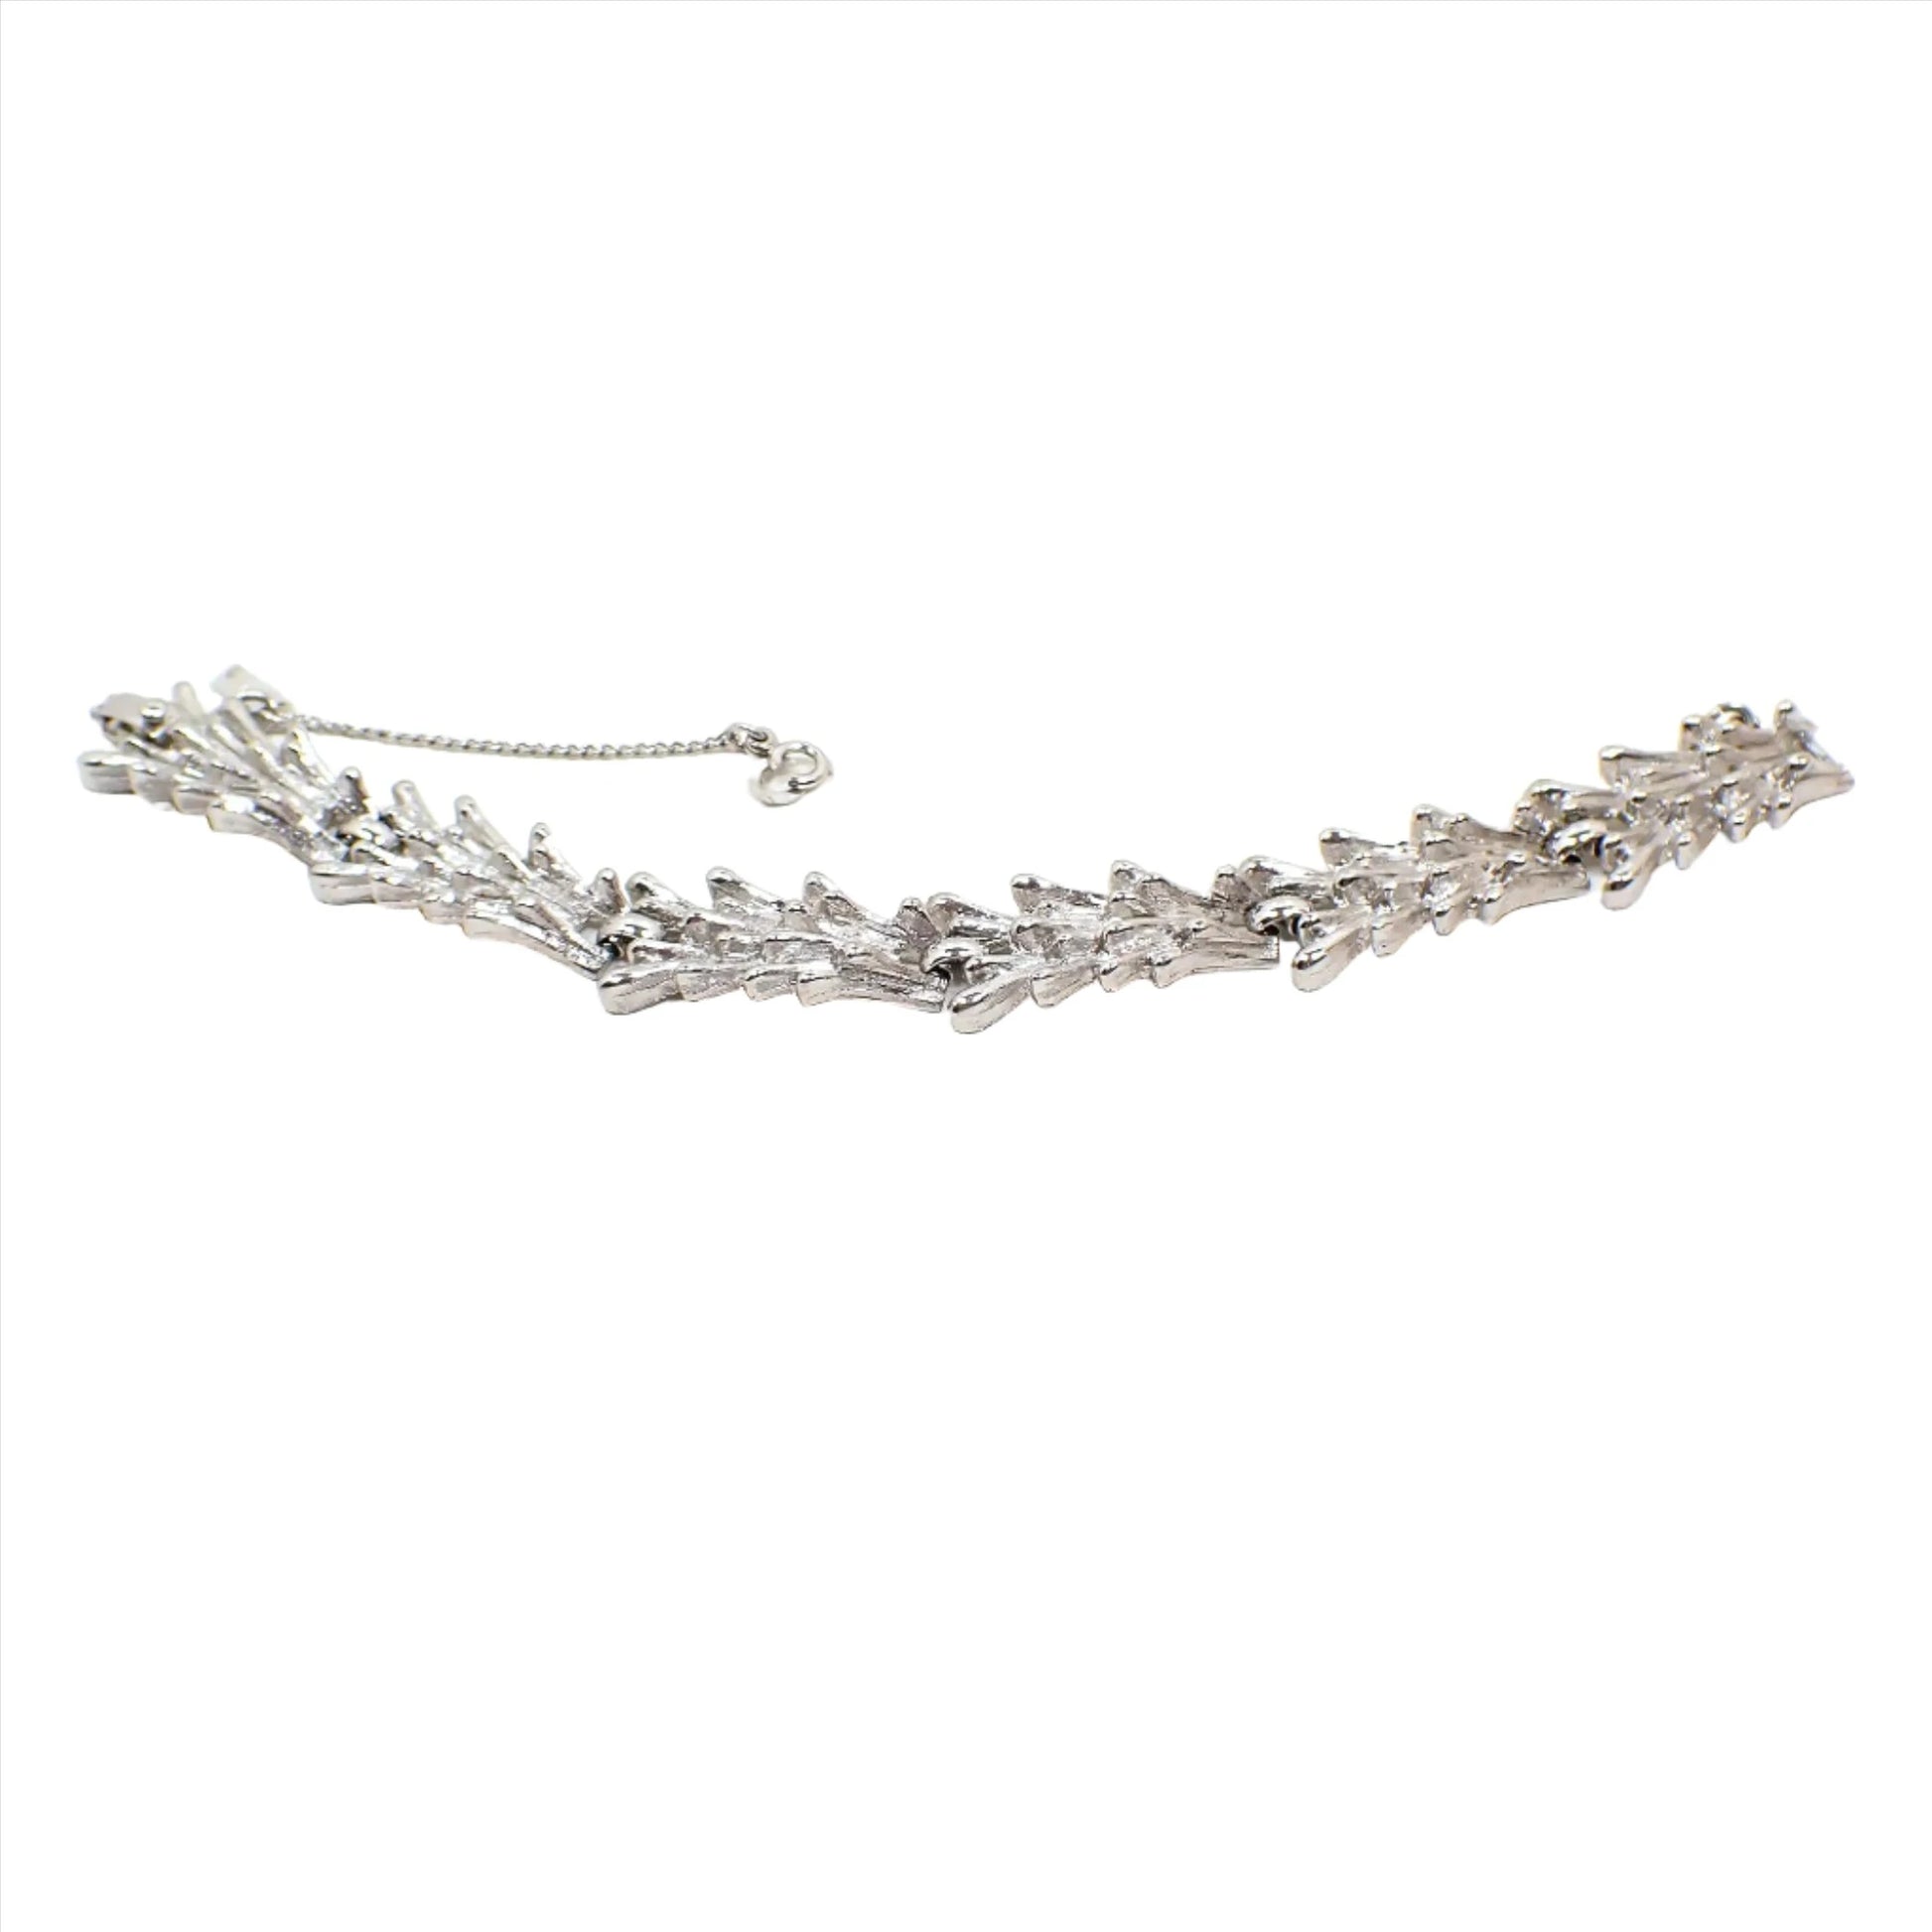 Angled view of the Mid Century vintage Monet link bracelet. The metal is textured matte silver tone in color. The links have a rounded end spiky Brutalist style appearance. There is a snap lock clasp at the end and a safety chain with hinged clasp. 